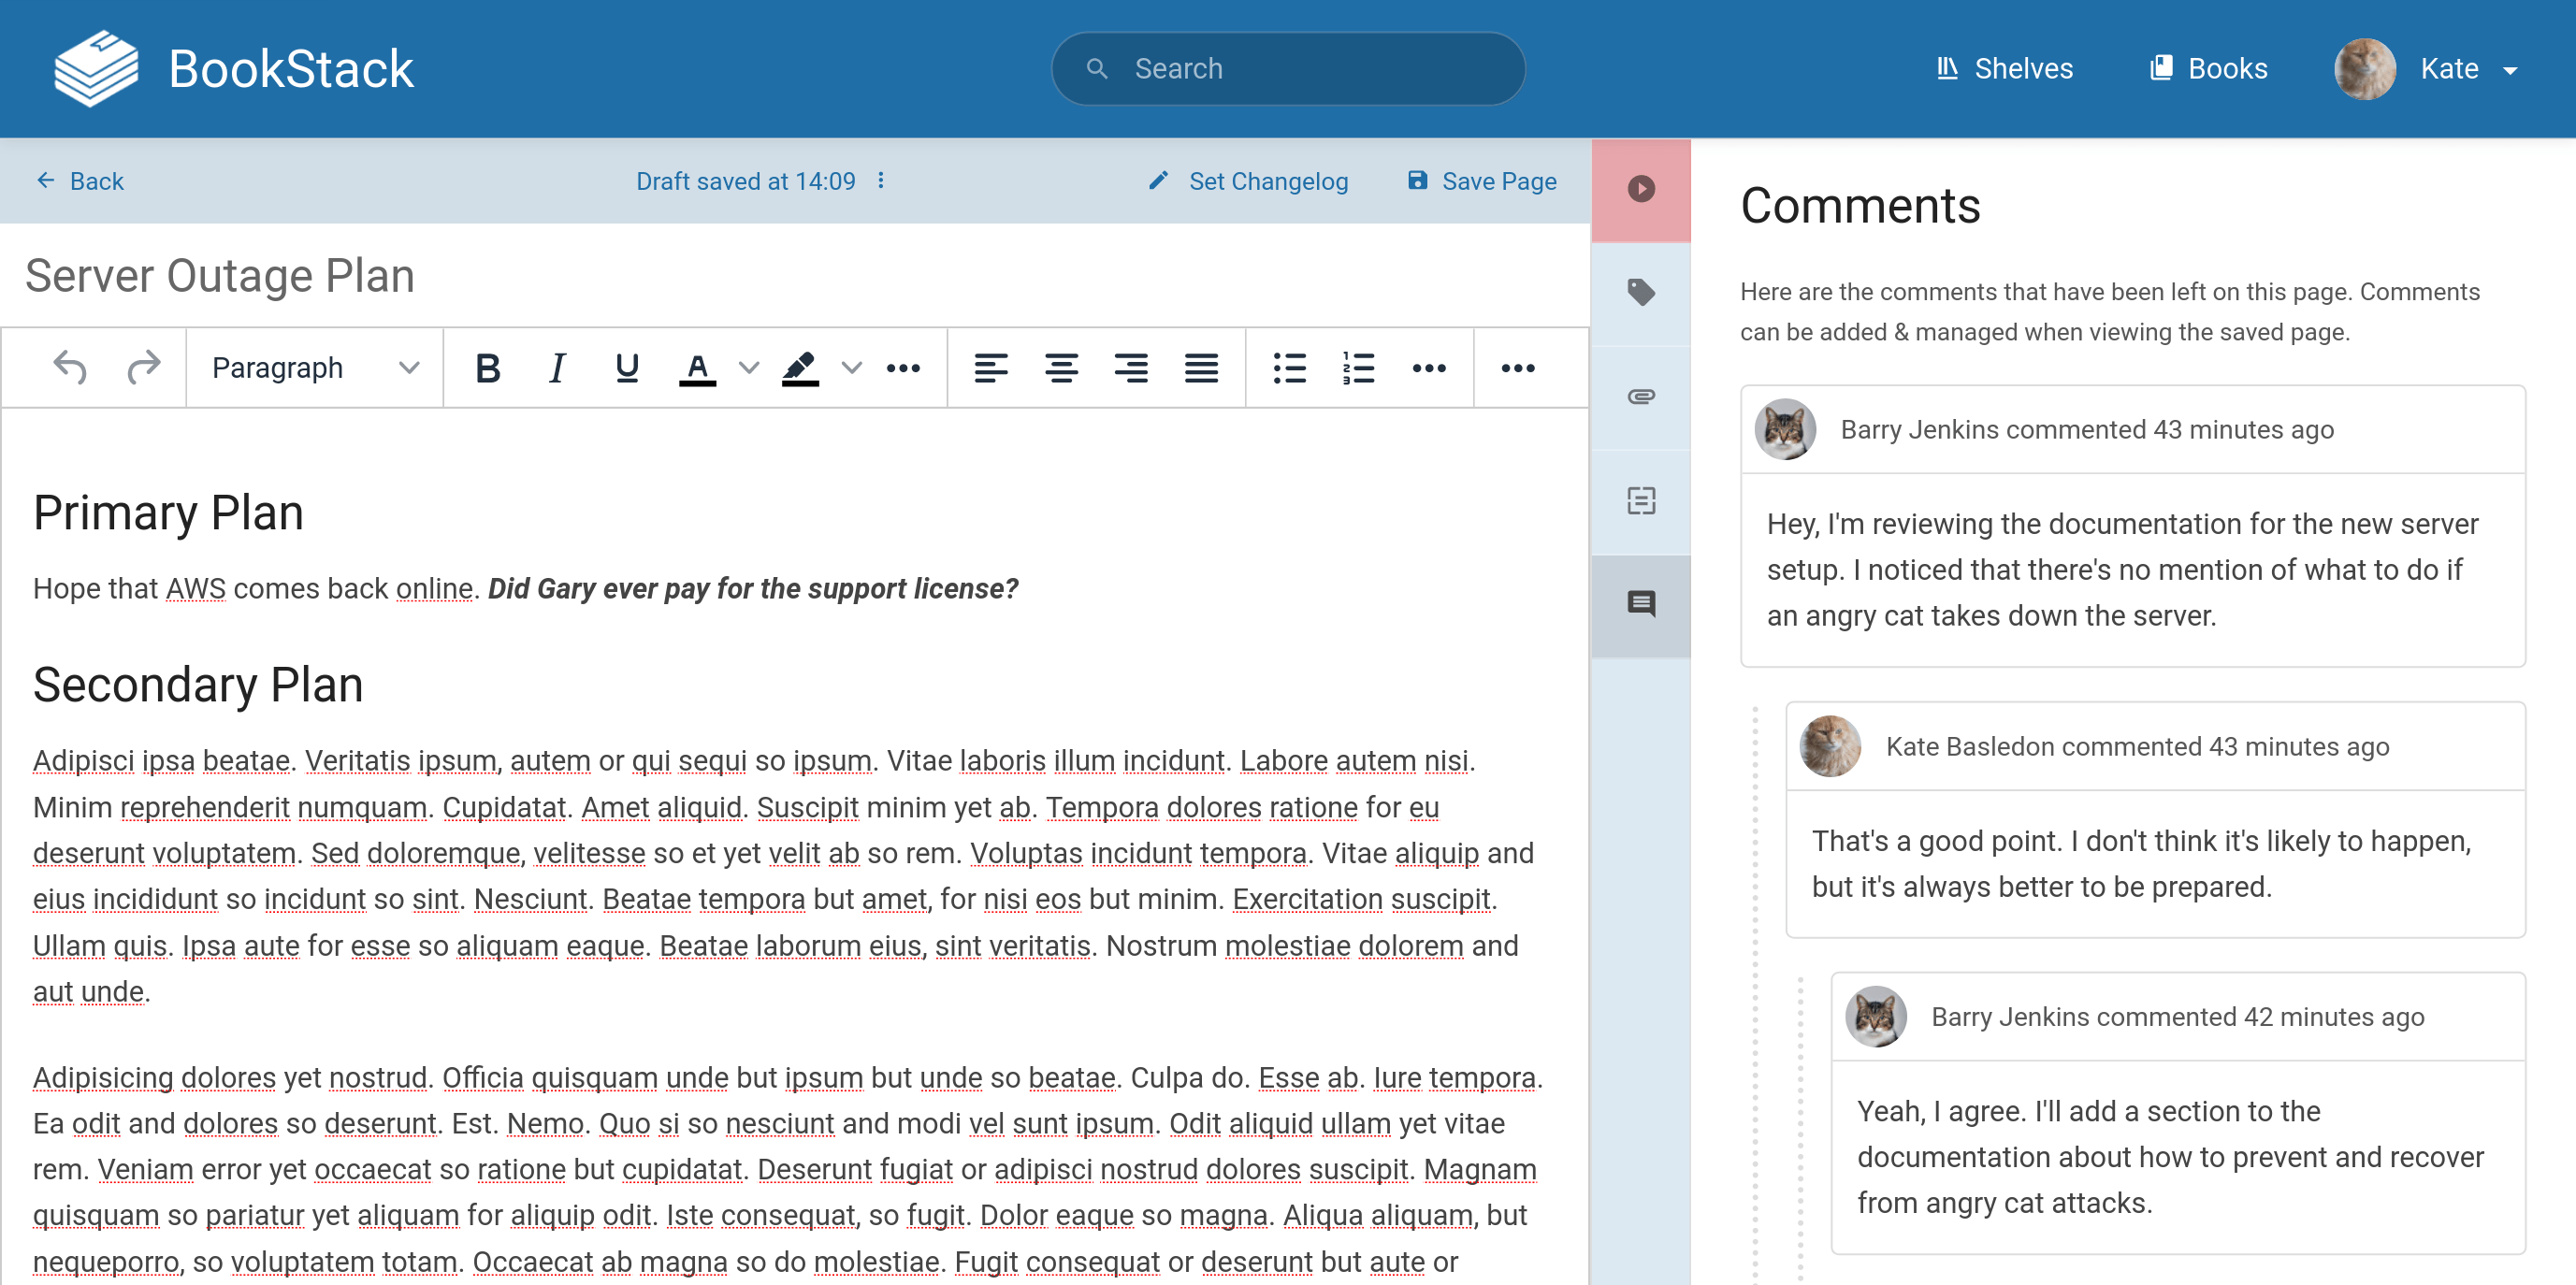 The BookStack editor view with a &ldquo;Comments&rdquo; section showing on the right, containing multiple user comments